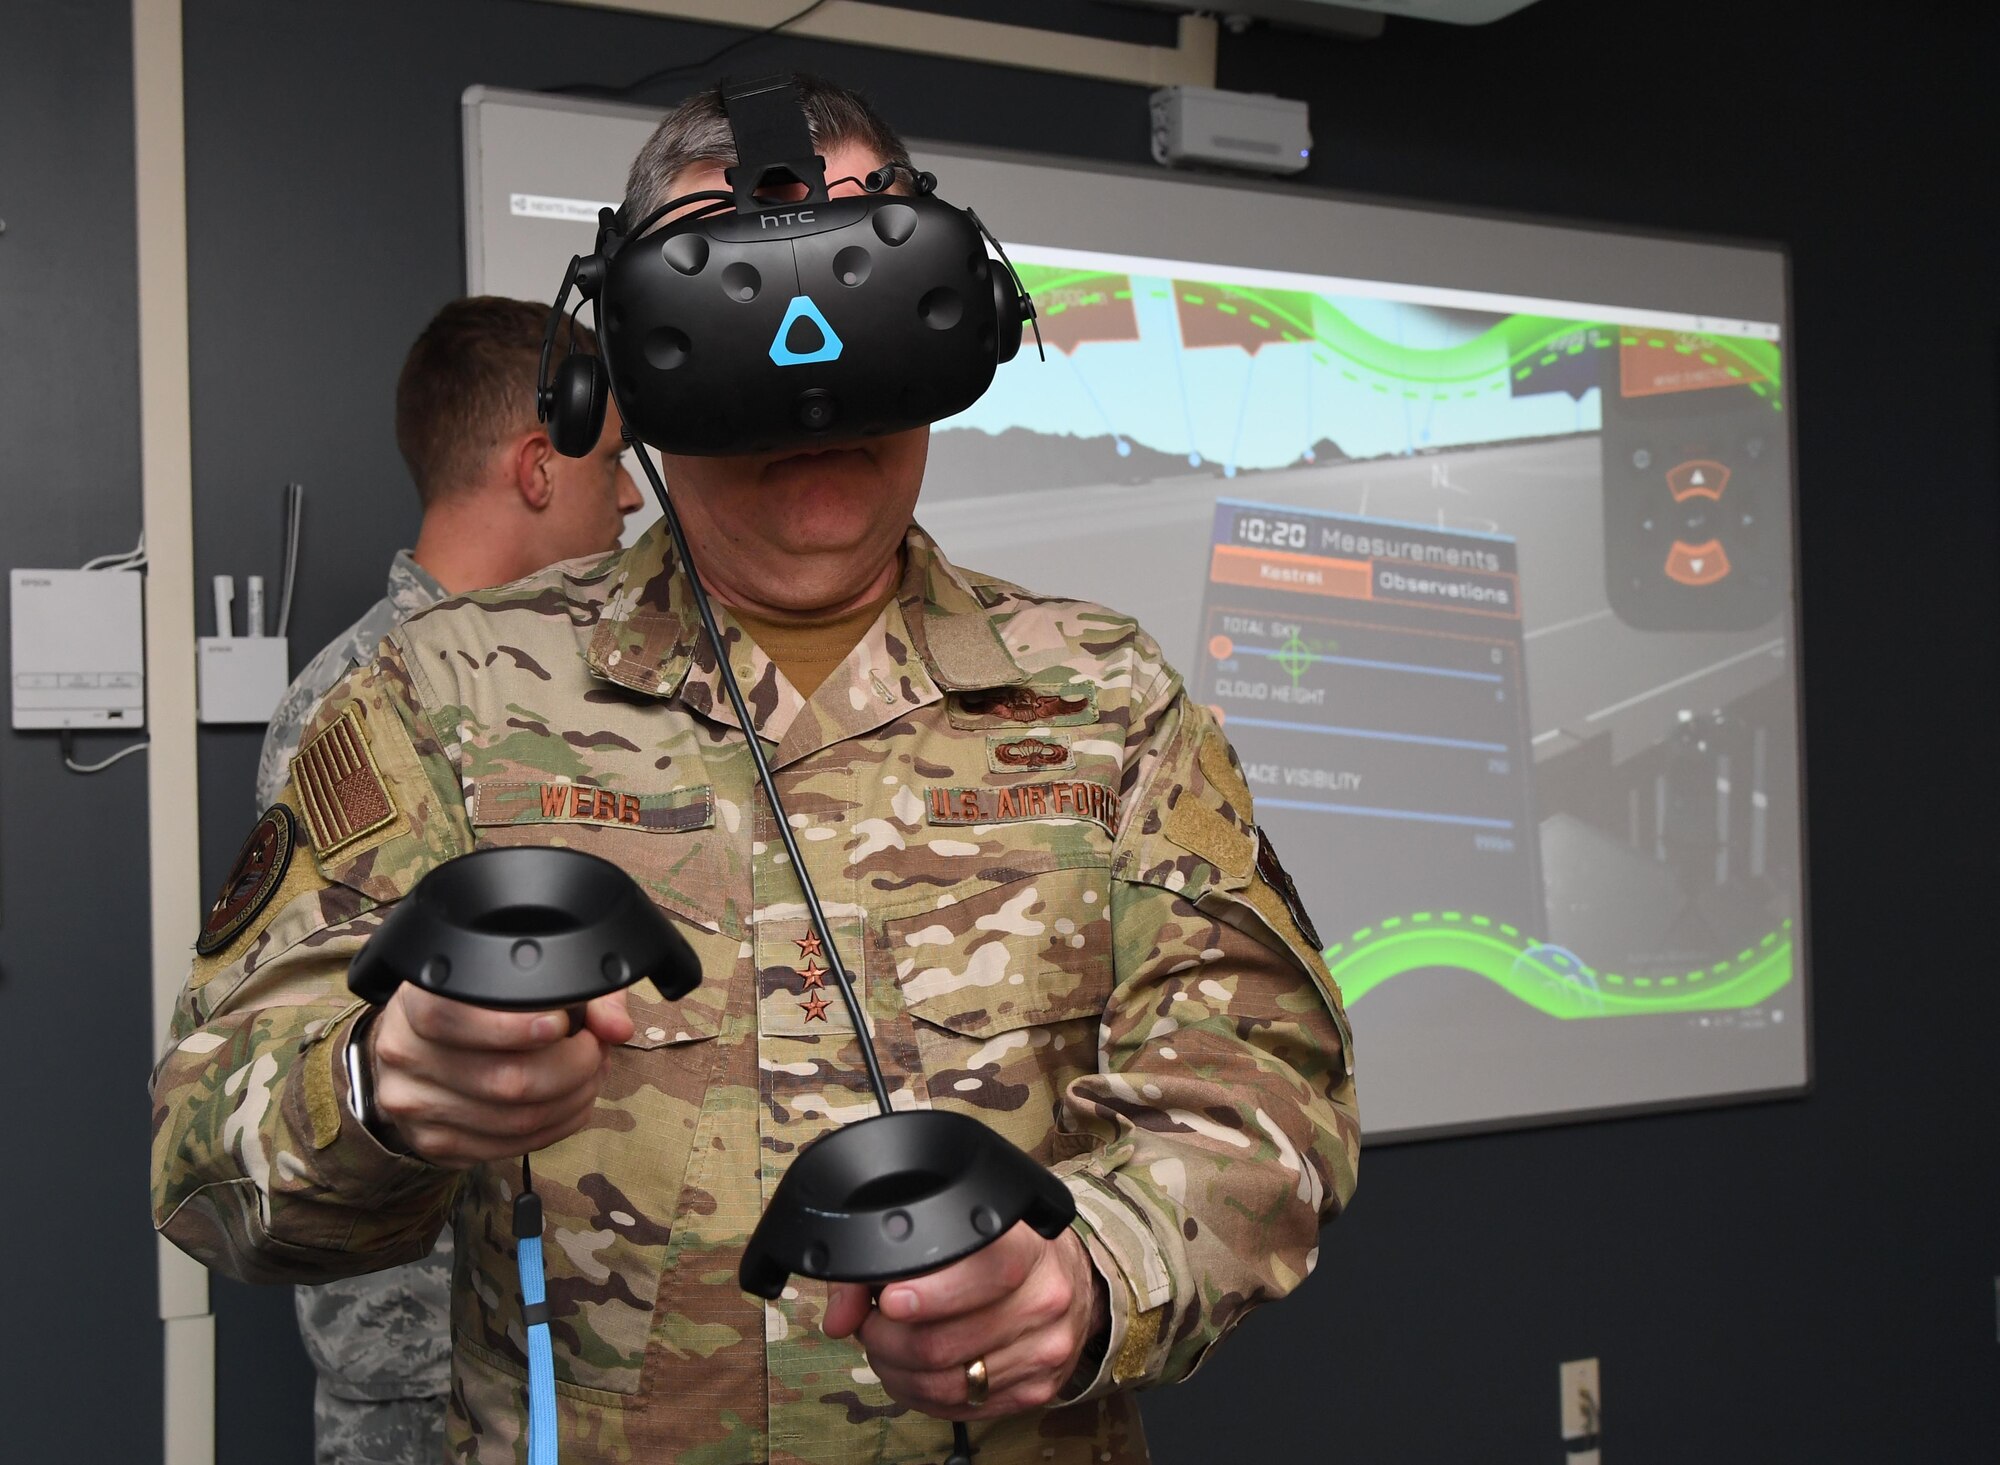 U.S. Air Force Lt. Gen. Brad Webb, commander of Air Education and Training Command, participates in a 335th Training Squadron weather course virtual reality demonstration during an immersion tour inside the Joint Weather Training Facility at Keesler Air Force Base, Mississippi, Jan. 30, 2020. The AETC command team visited Keesler in order to become more familiar with the mission capabilities of the 81st Training Wing and to view the paradigm shift occurring in the training environment within the 81st Training Group. (U.S. Air Force photo by Kemberly Groue)